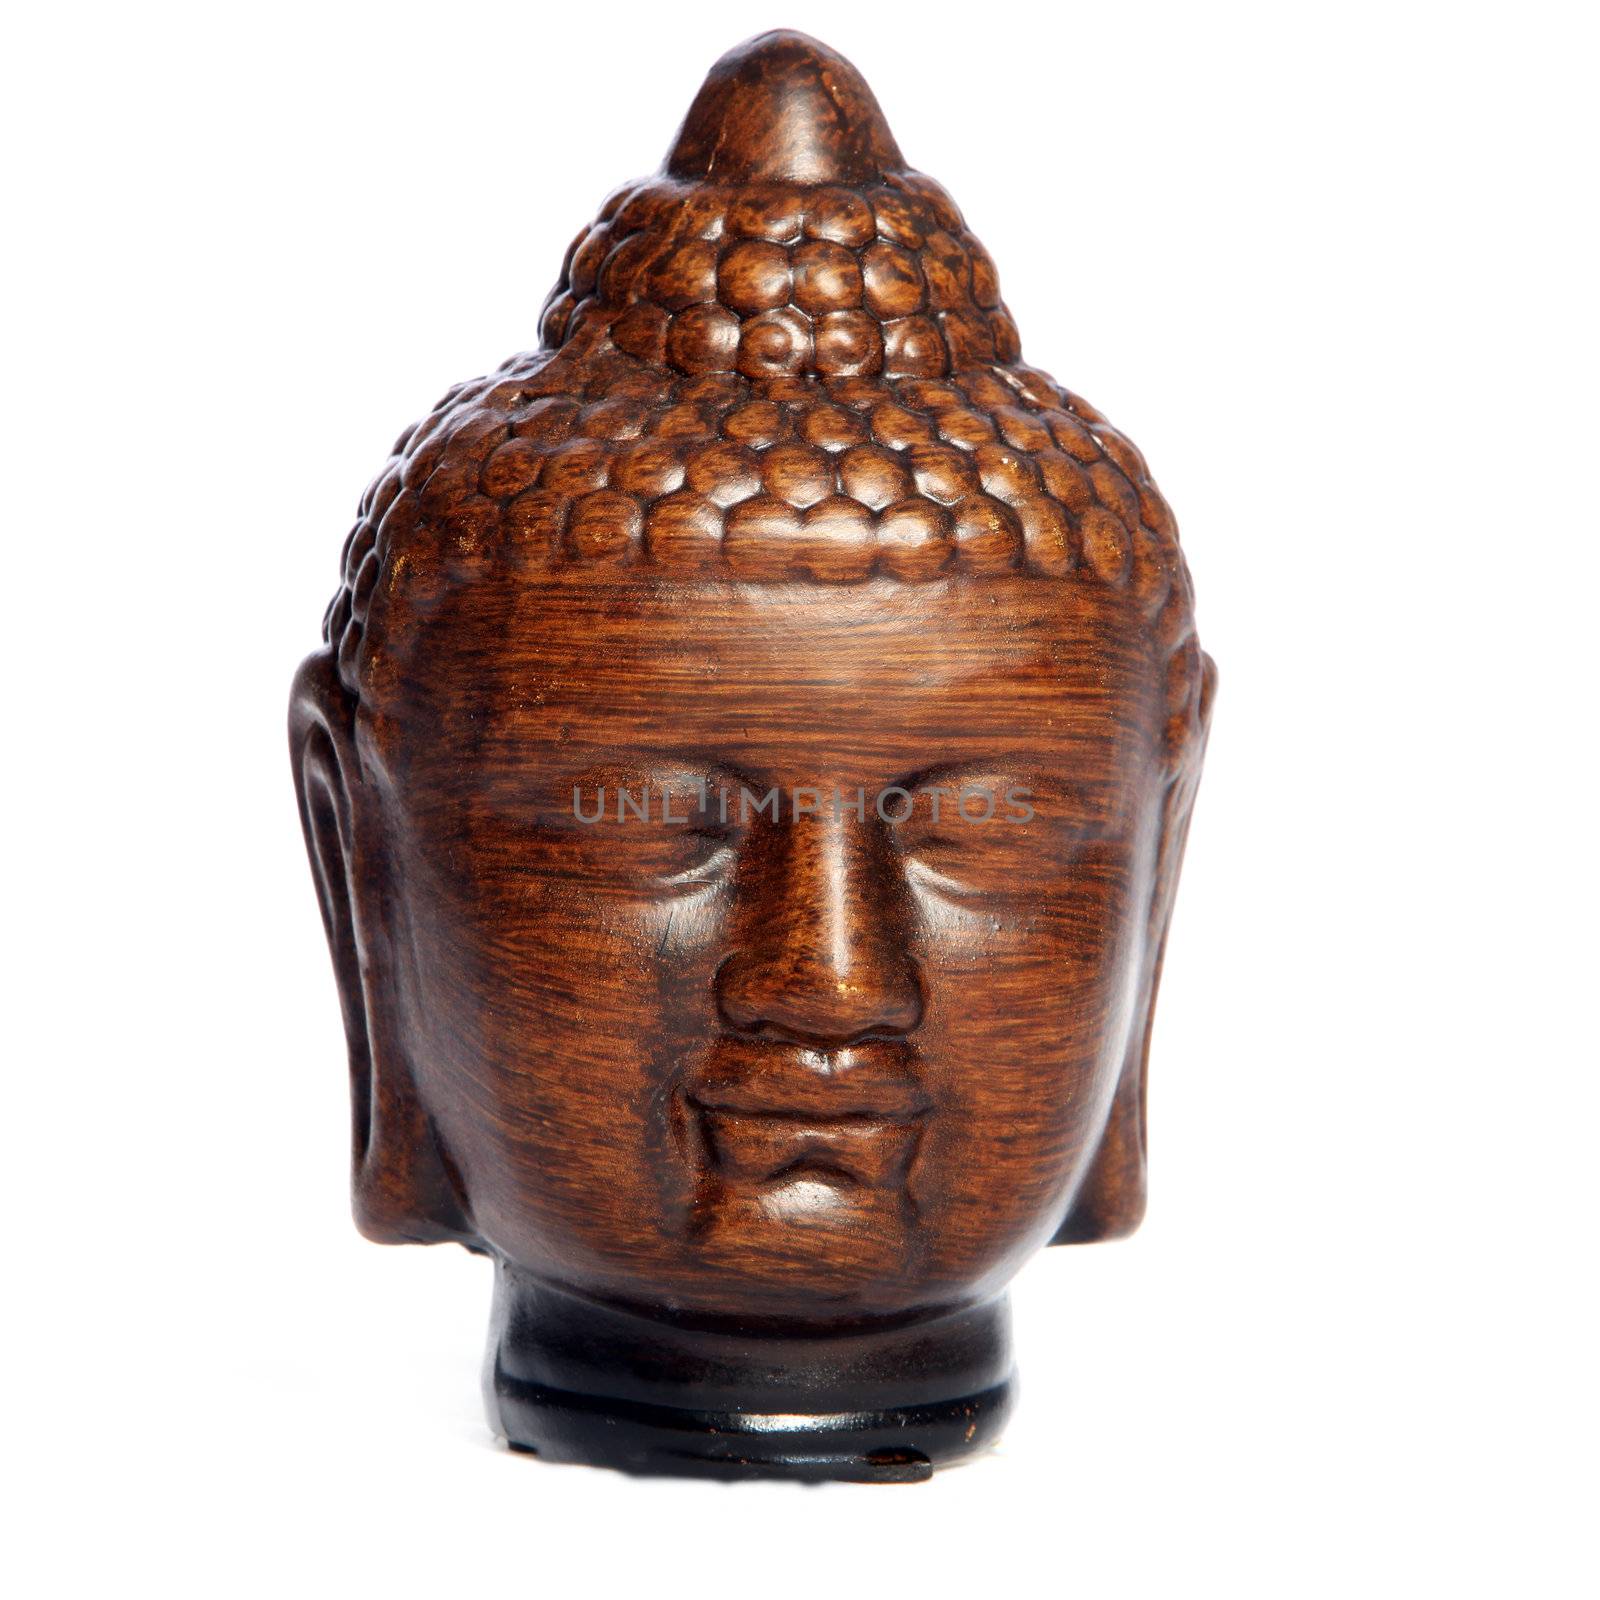 Wooden Buddha head carving in Asian style with eyes closed in meditation, prayer and serenity in the pursuit of enlightenment